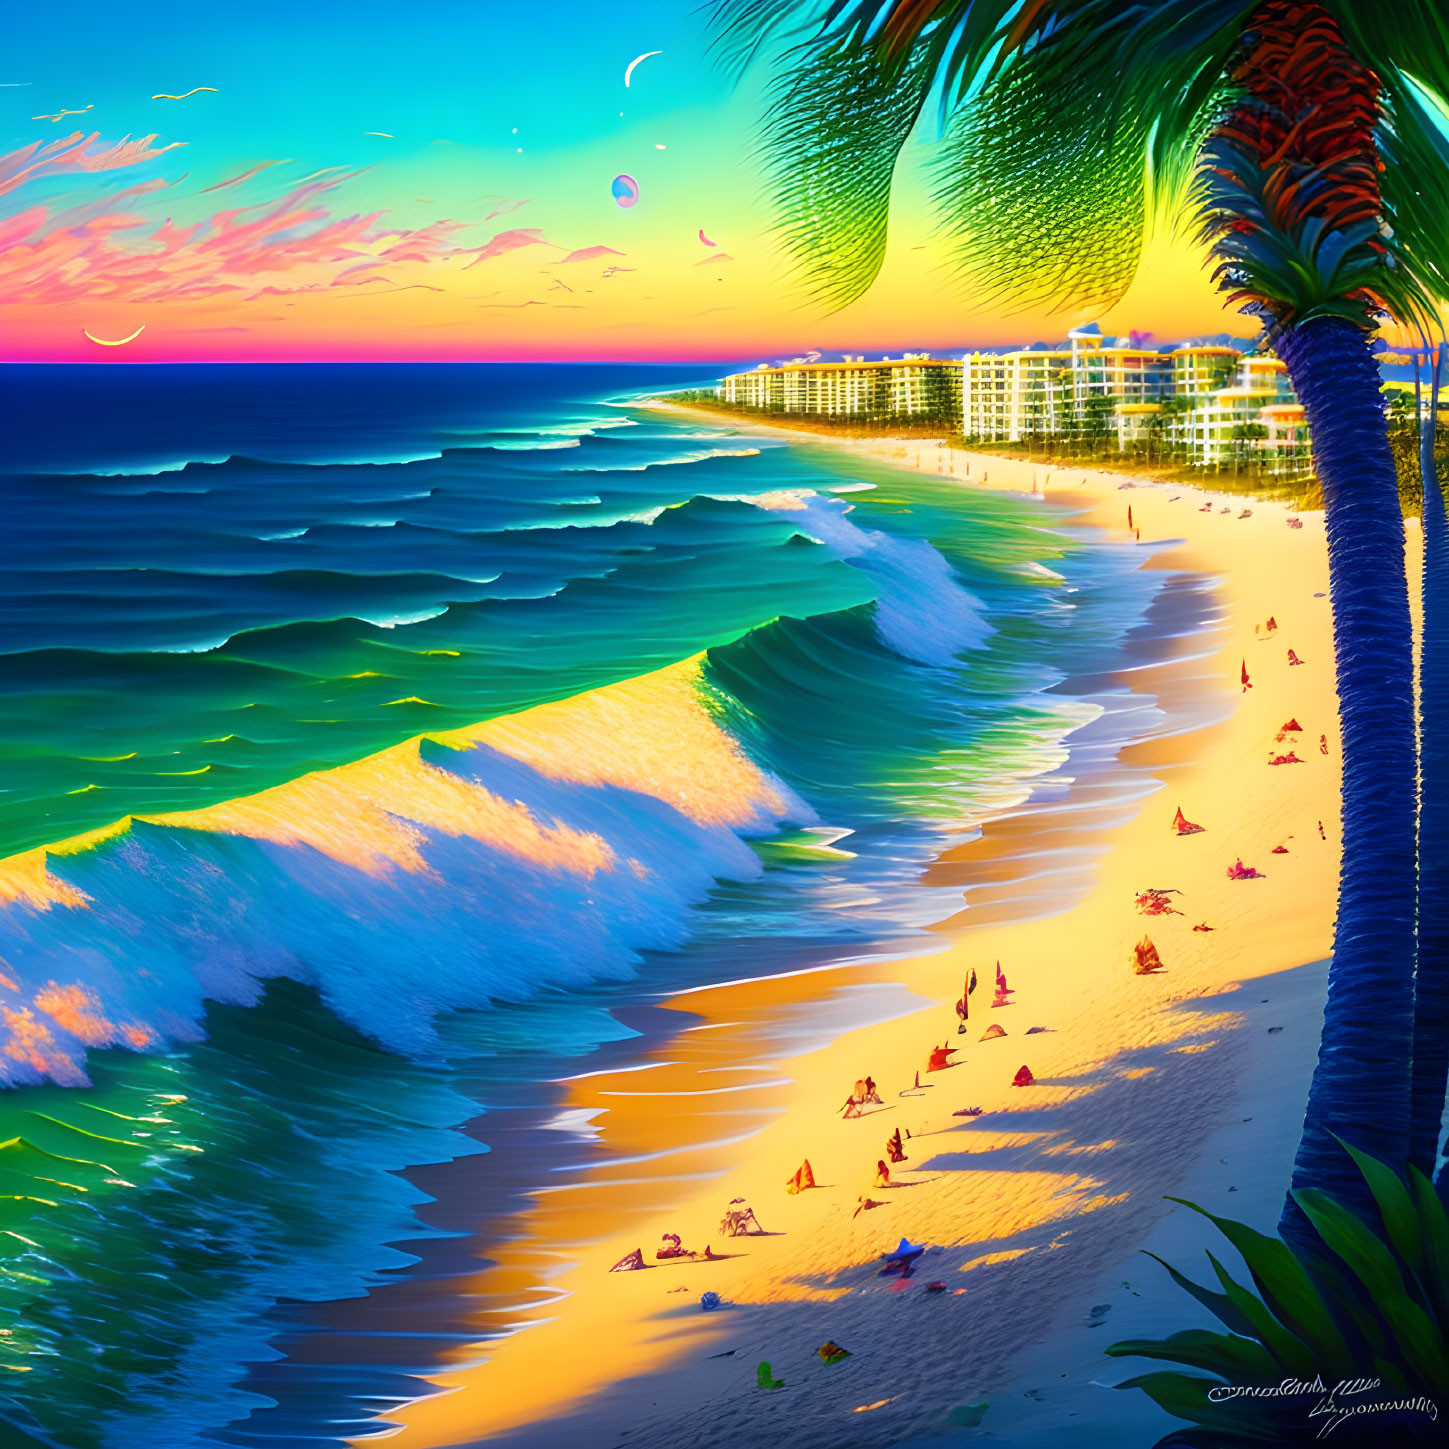 Vibrant beach scene with palm tree, rolling waves, people, buildings, and colorful sunset sky